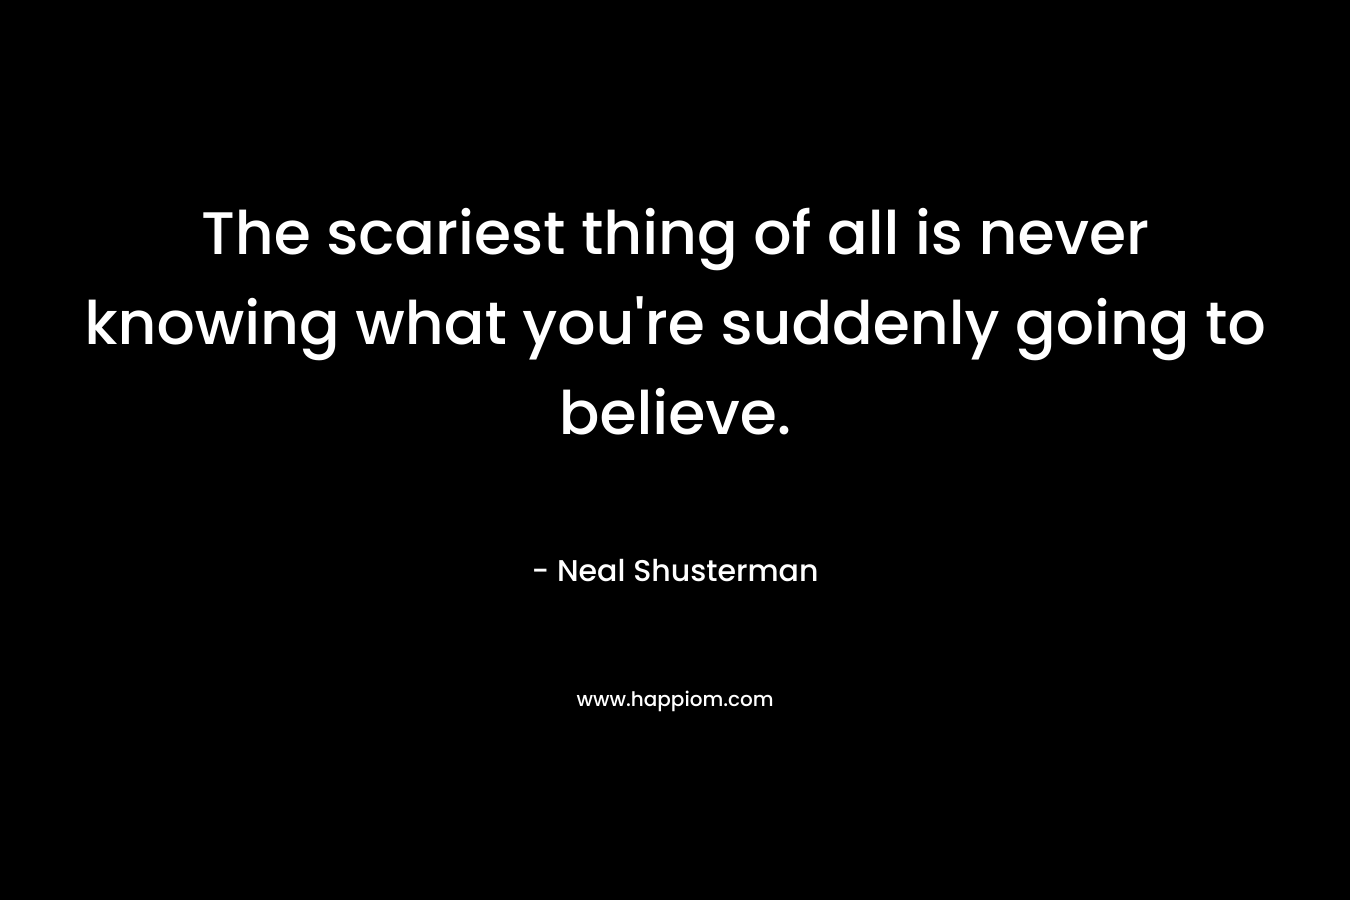 The scariest thing of all is never knowing what you're suddenly going to believe.